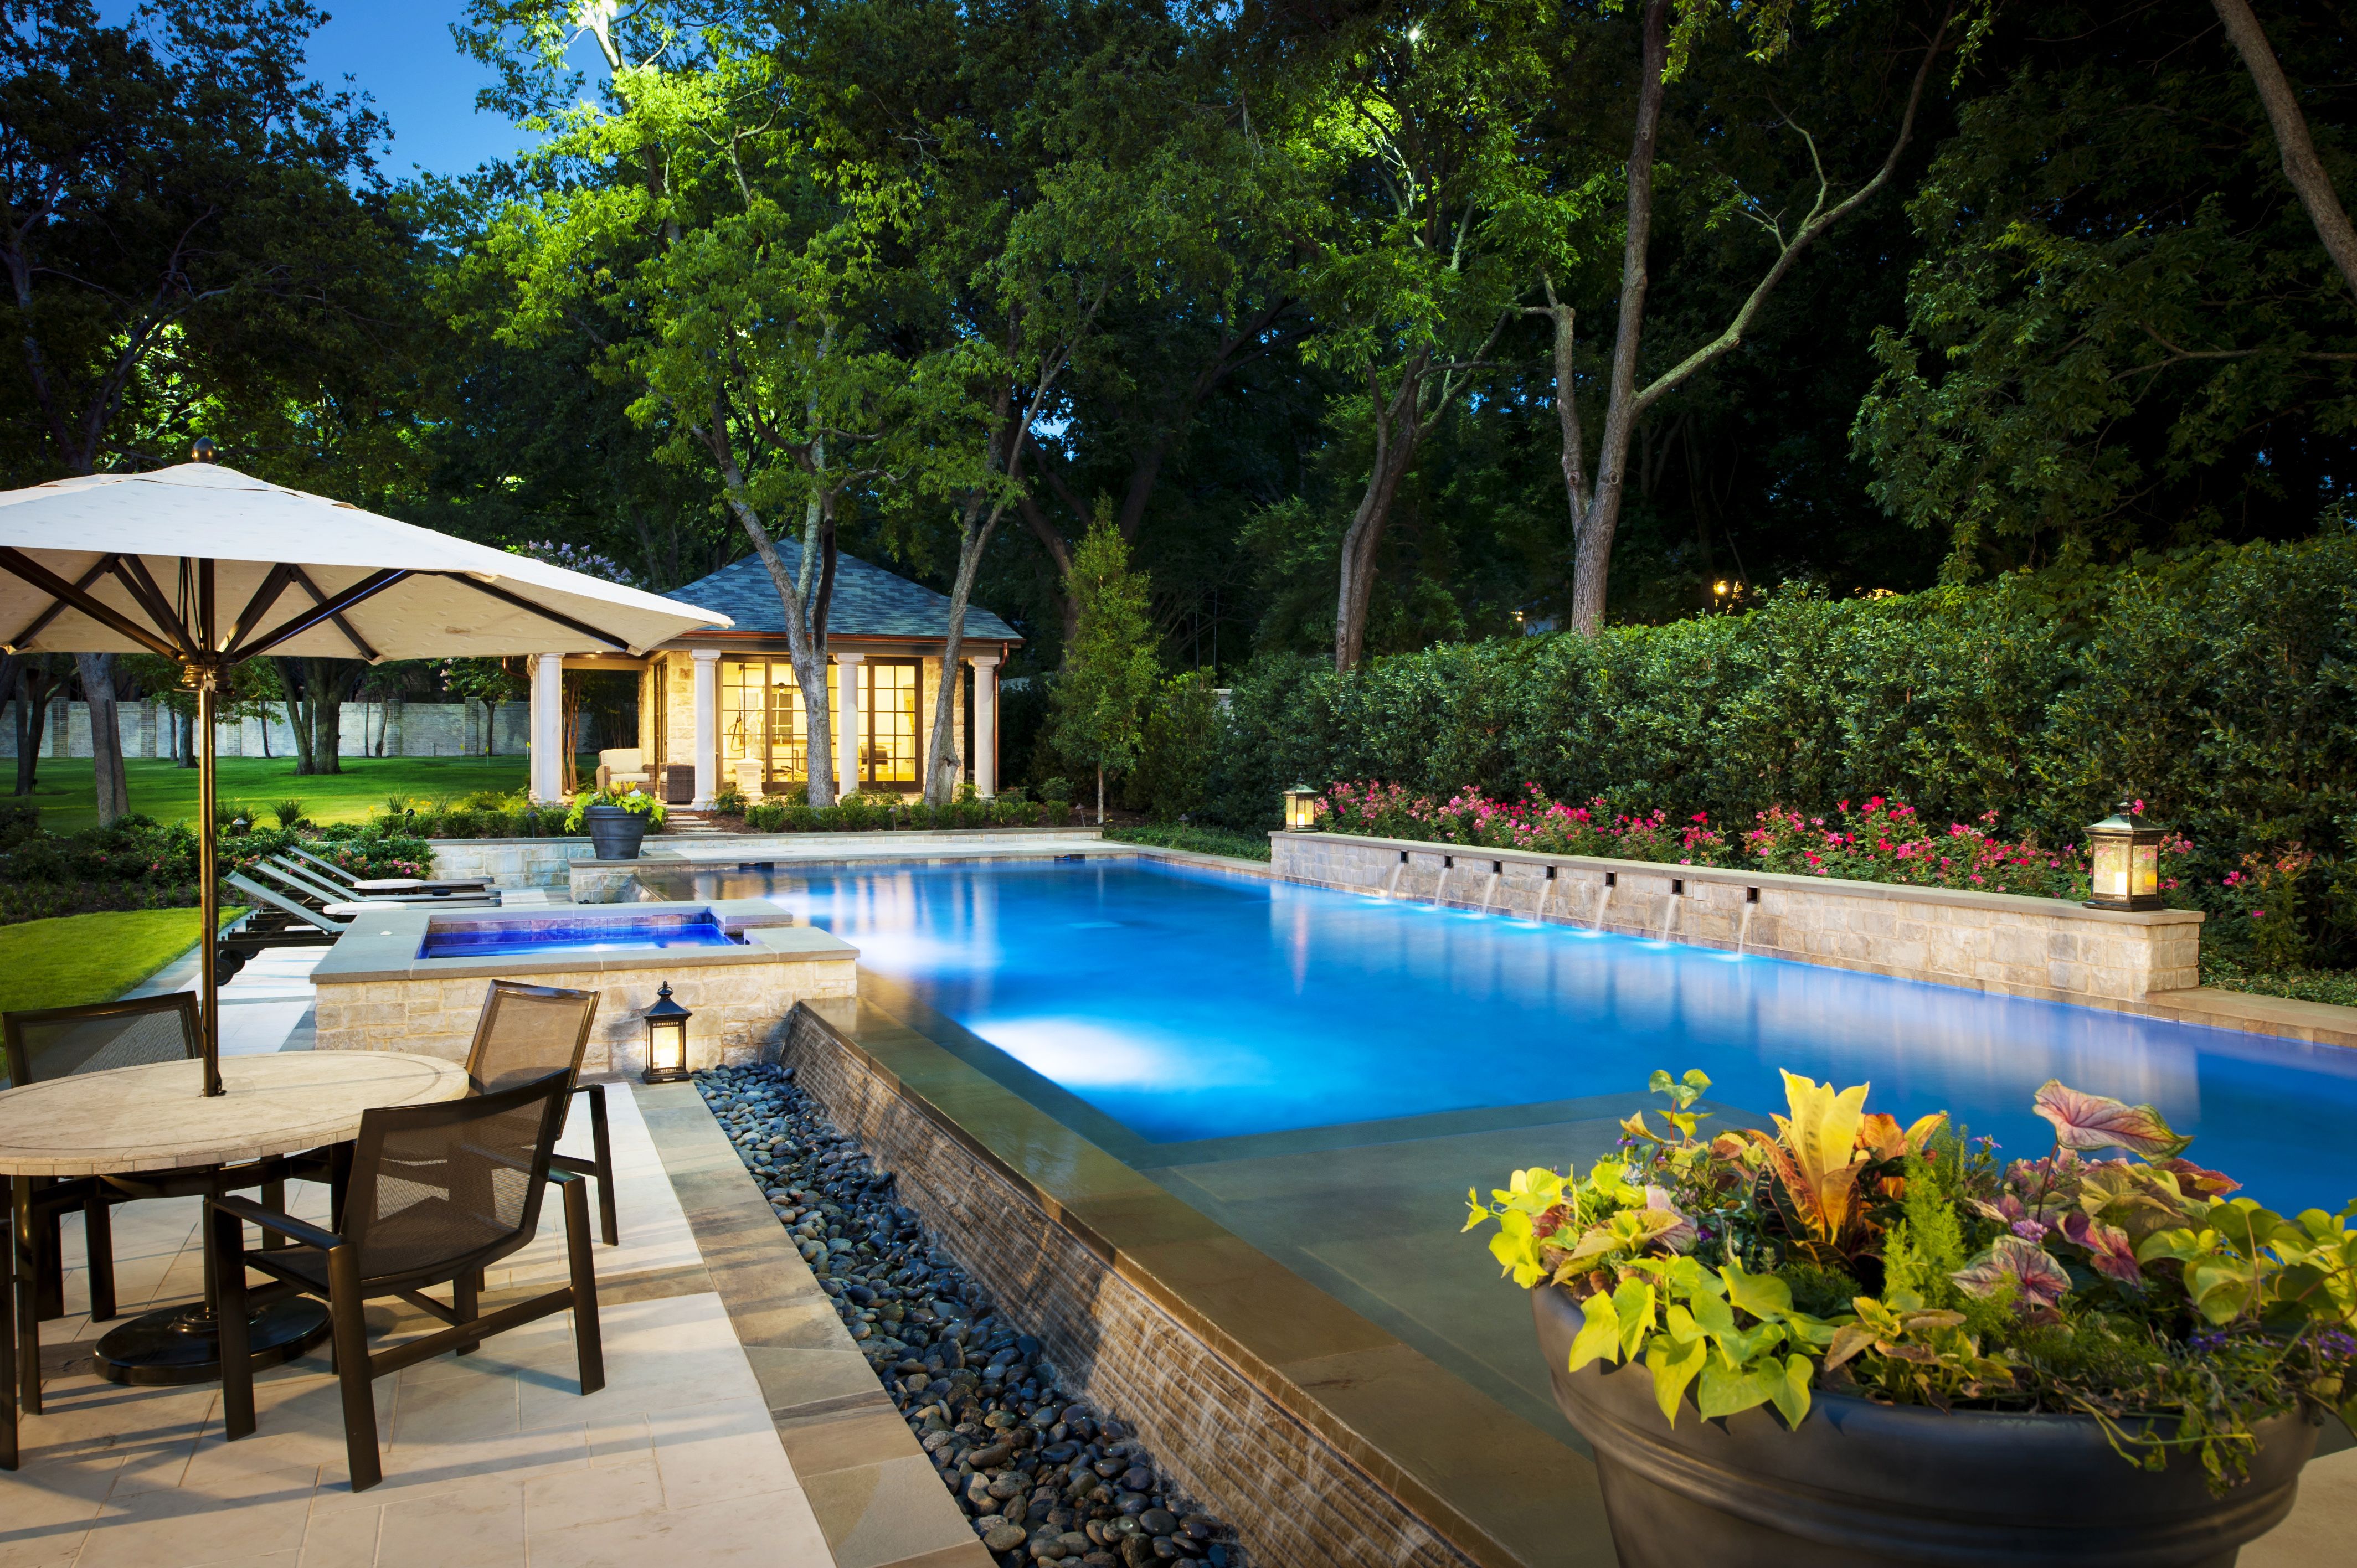 luxurious backyard landscaping ideas with fancy pool